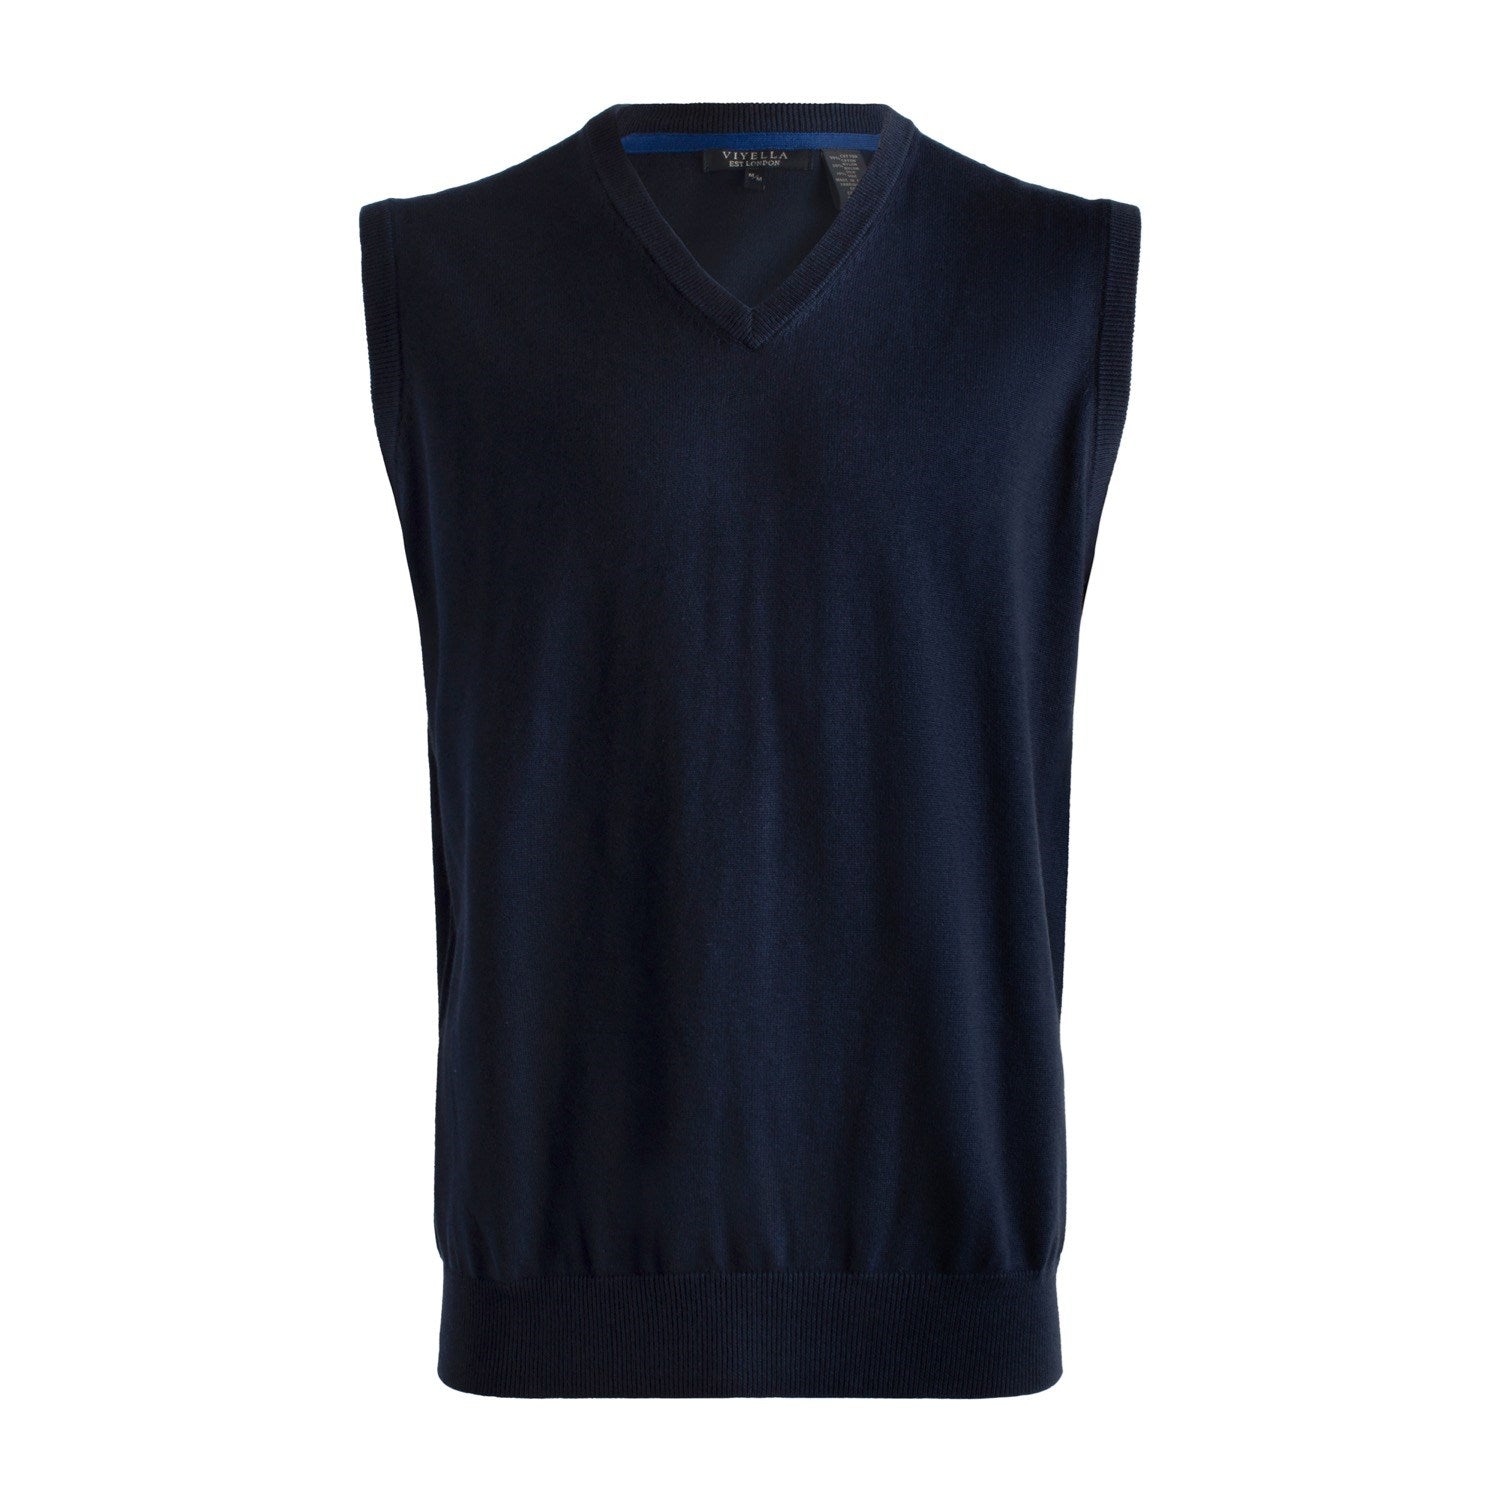 Cotton and Silk Blend V-Neck Sweater Vest in Navy by Viyella